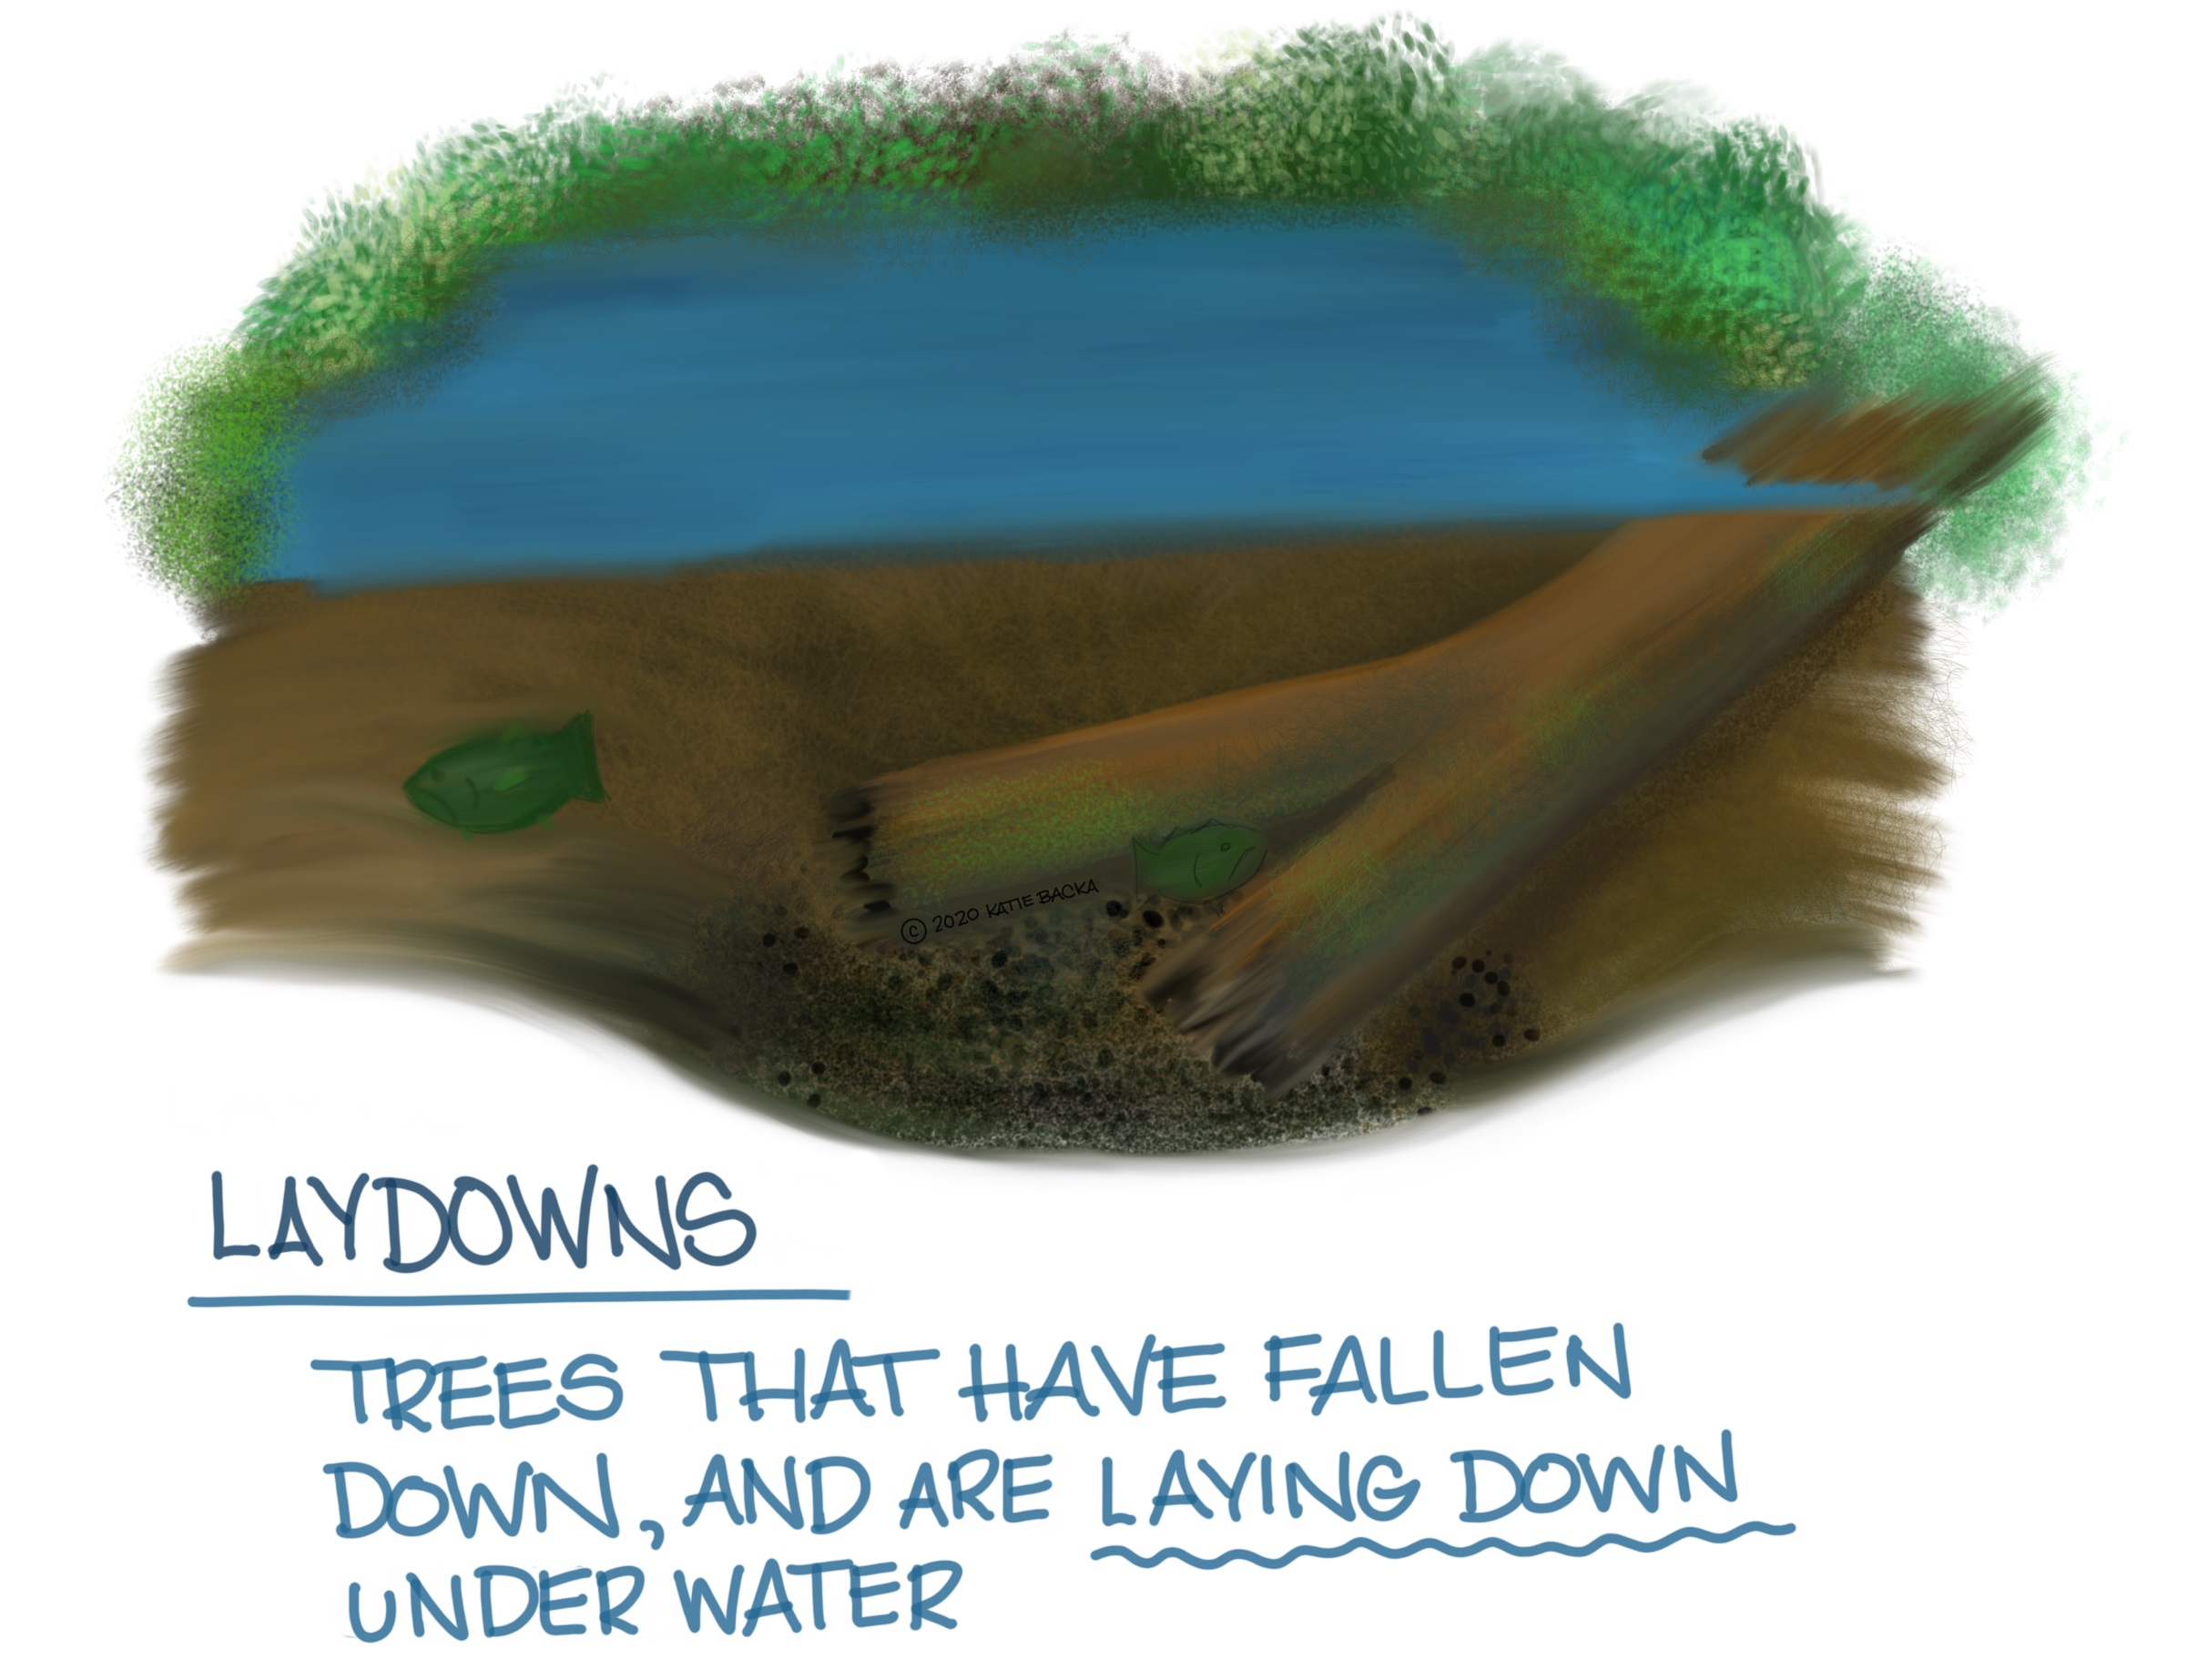 Script: Laydowns, Trees that have fallen down, and are laying down underwater